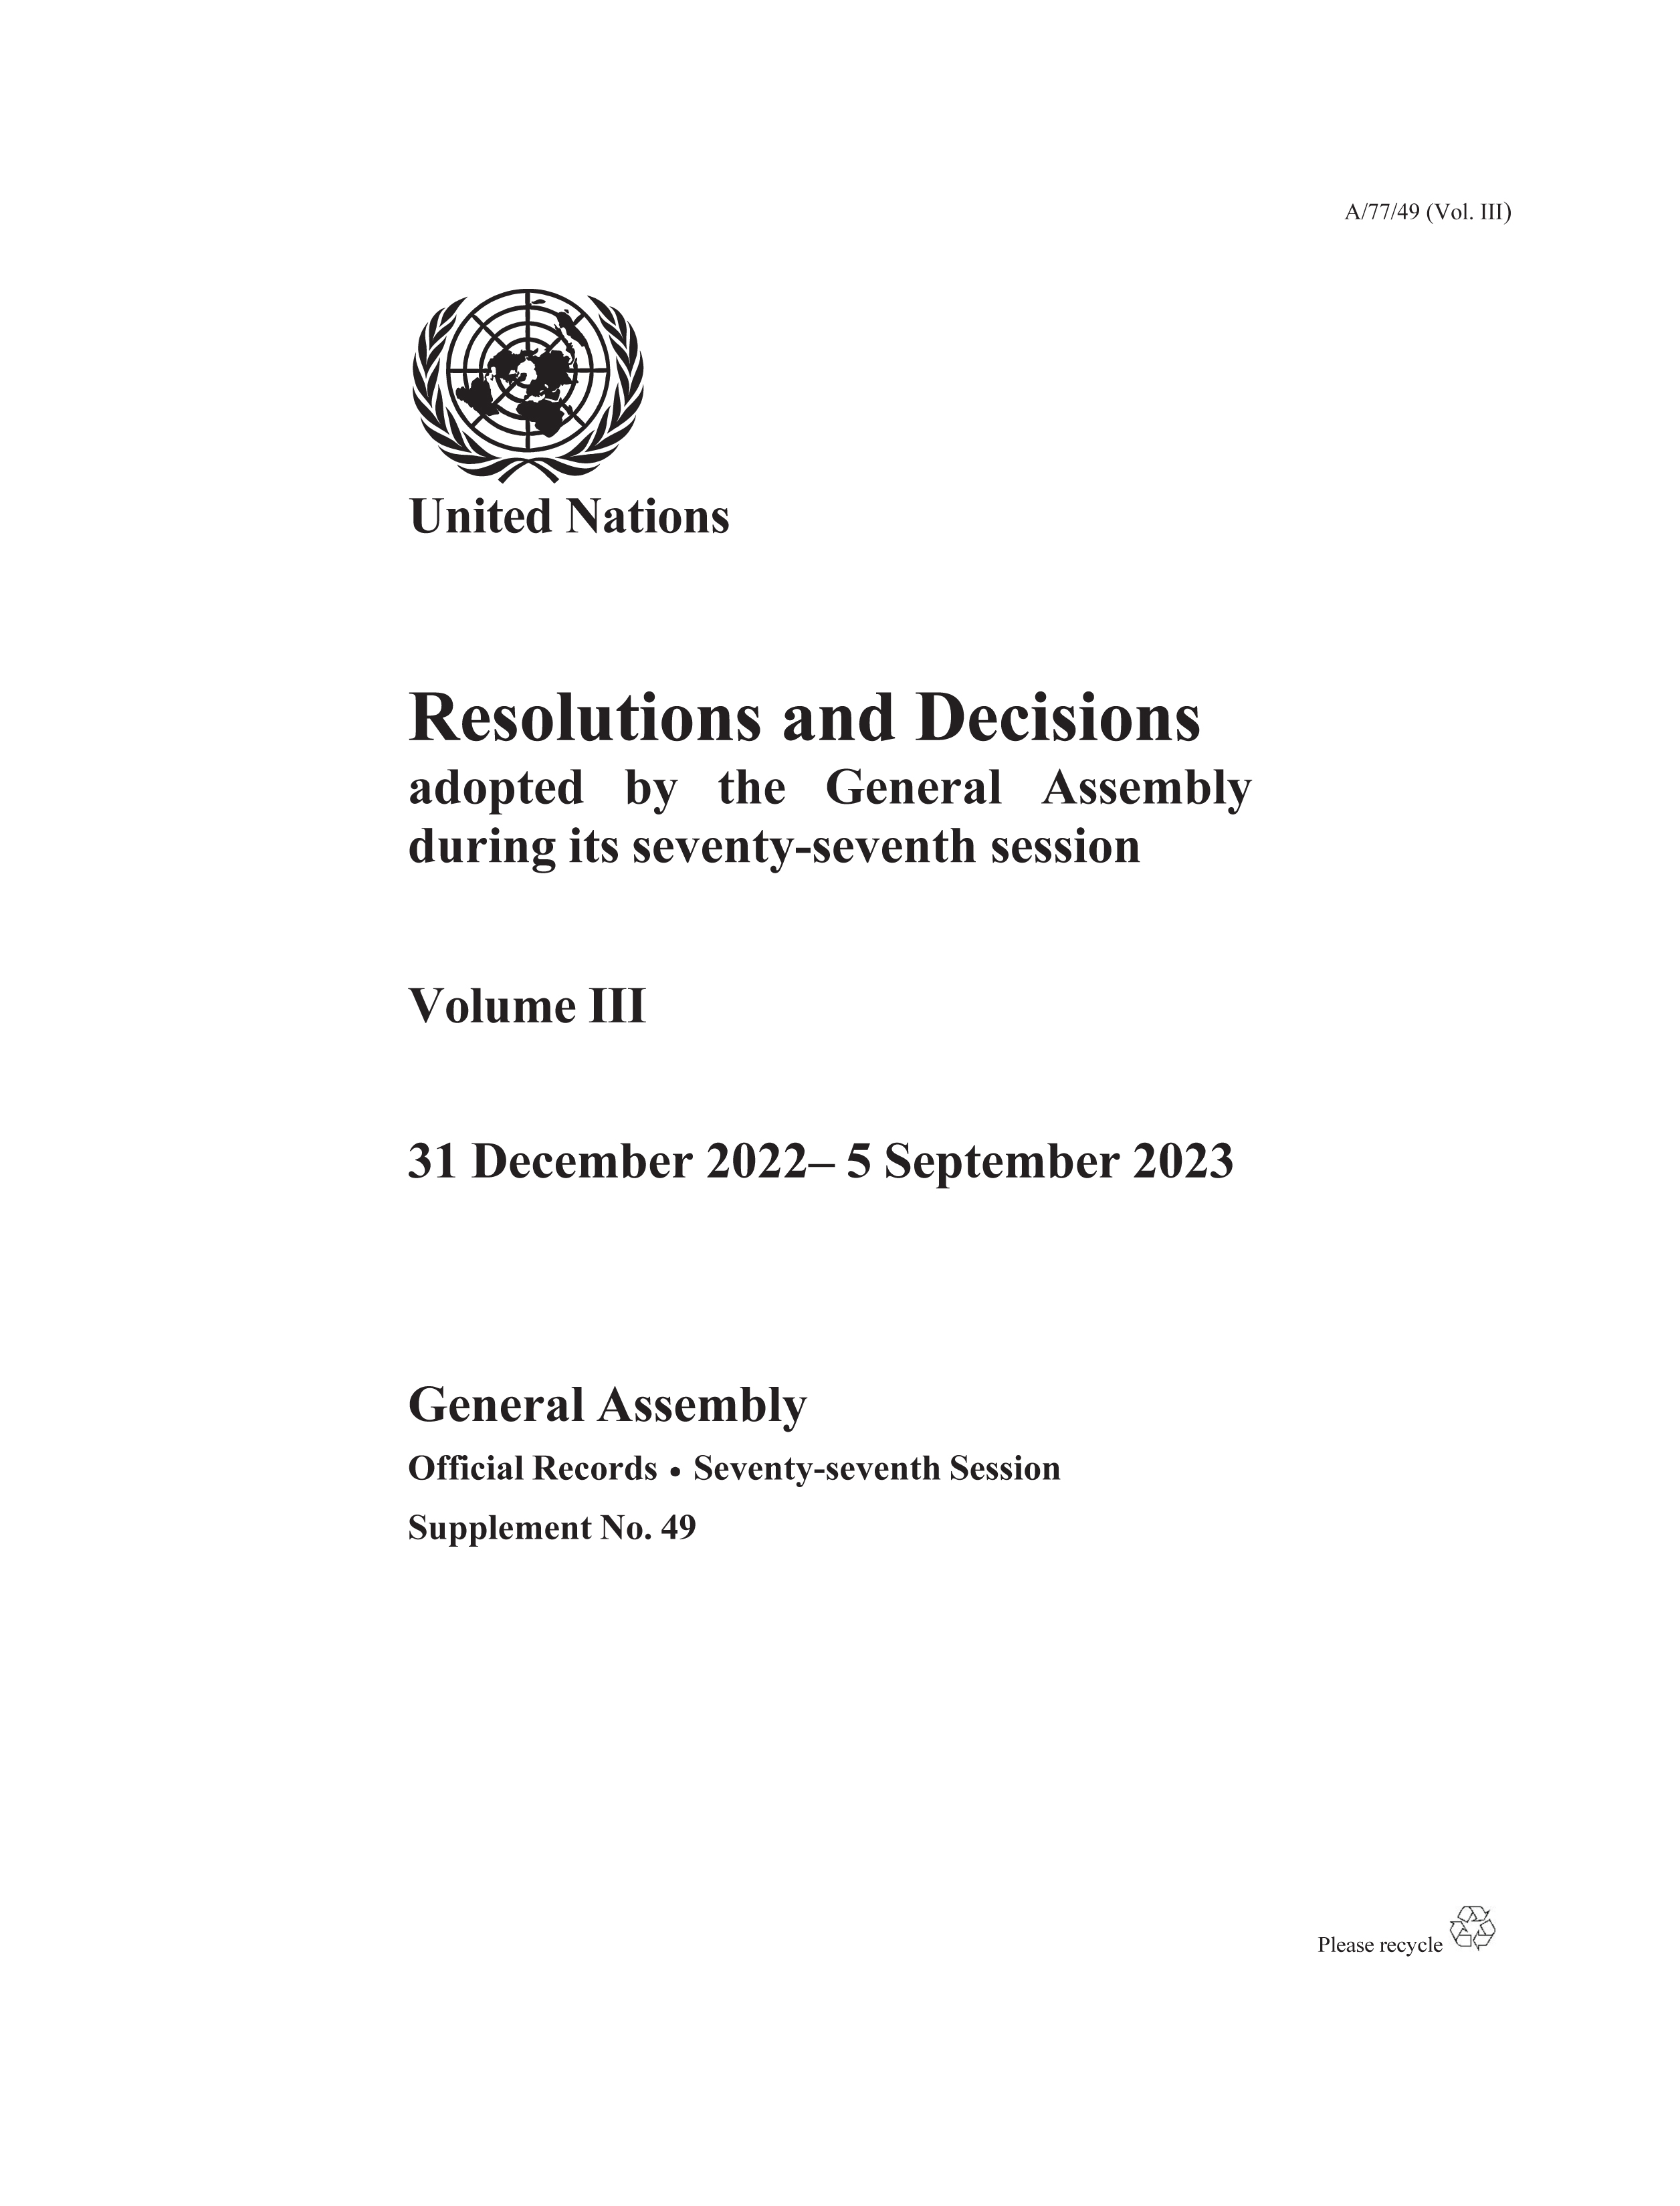 image of Resolutions and Decisions Adopted by the General Assembly During its Seventy-seventh Session: Volume III